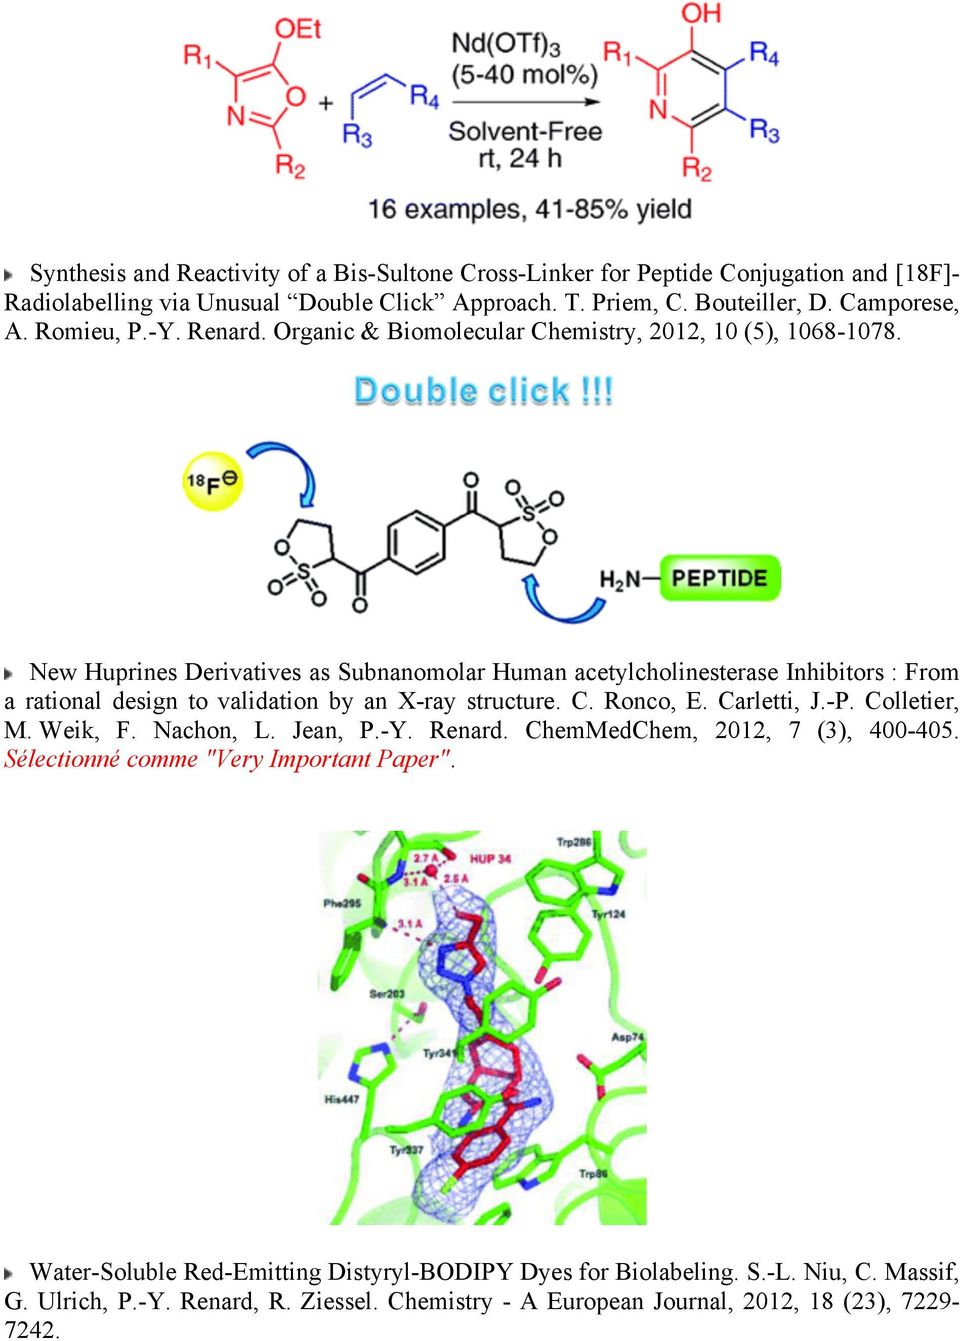 New Huprines Derivatives as Subnanomolar Human acetylcholinesterase Inhibitors : From a rational design to validation by an X-ray structure. C. Ronco, E. Carletti, J.-P. Colletier, M.